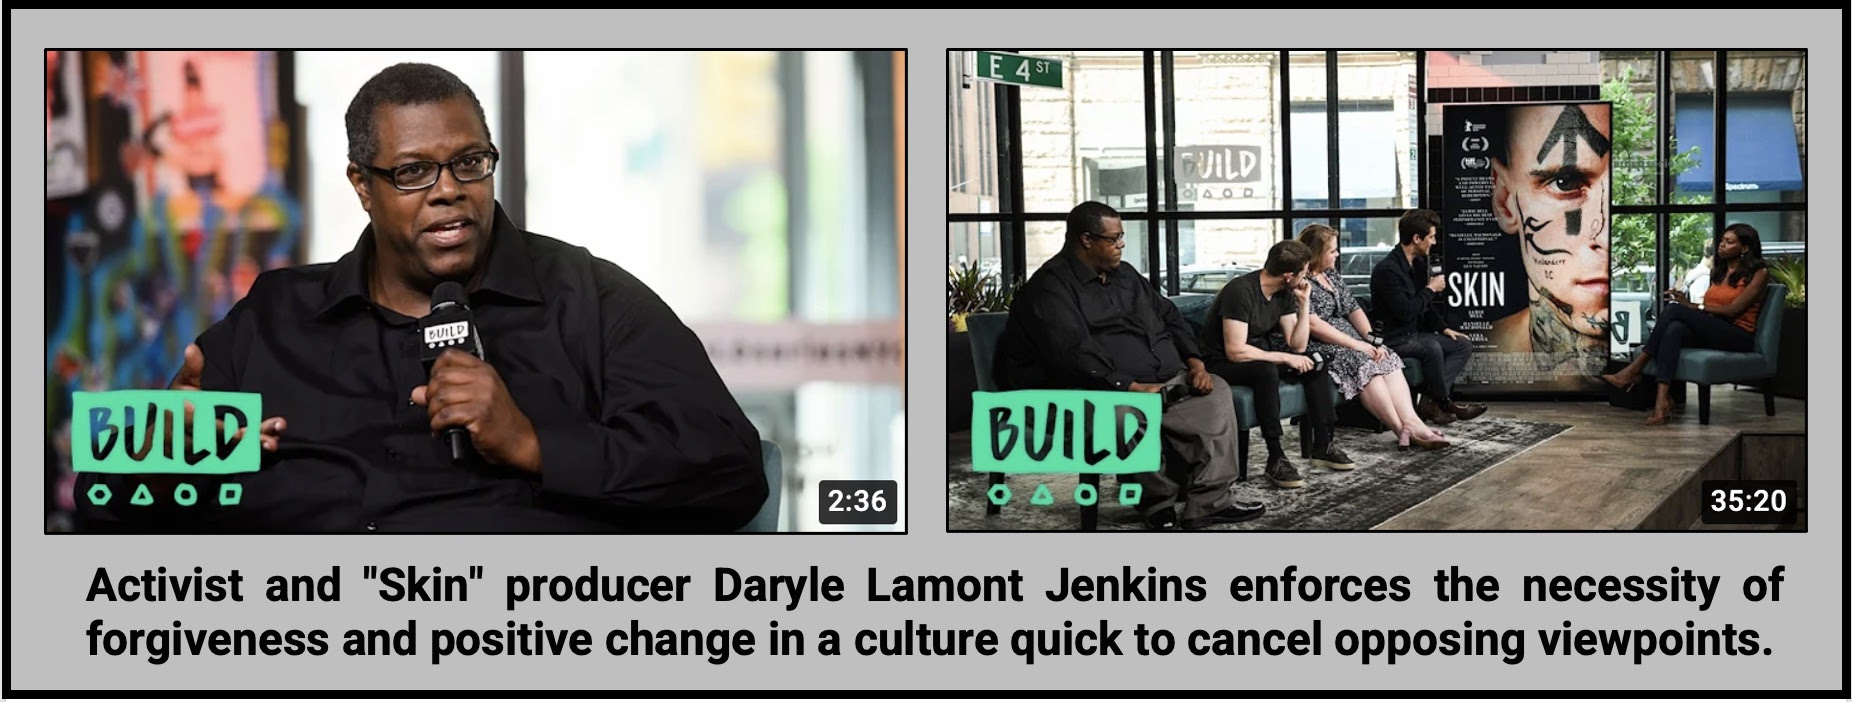 Daryle Lamonte Jenkins exposes white supremacists and extremists